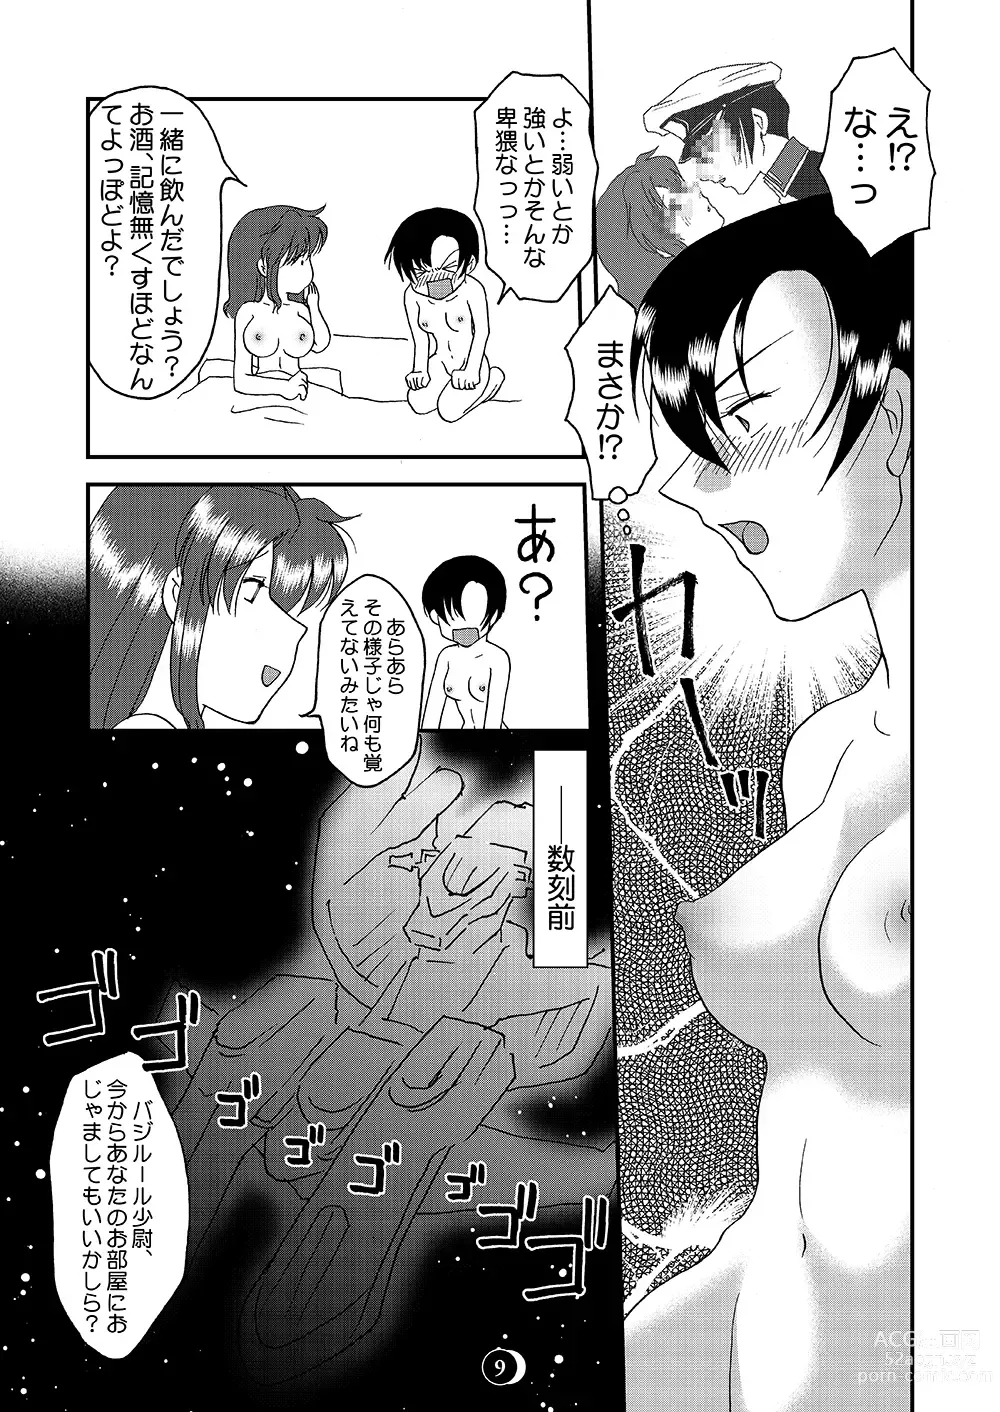 Page 6 of doujinshi This Night